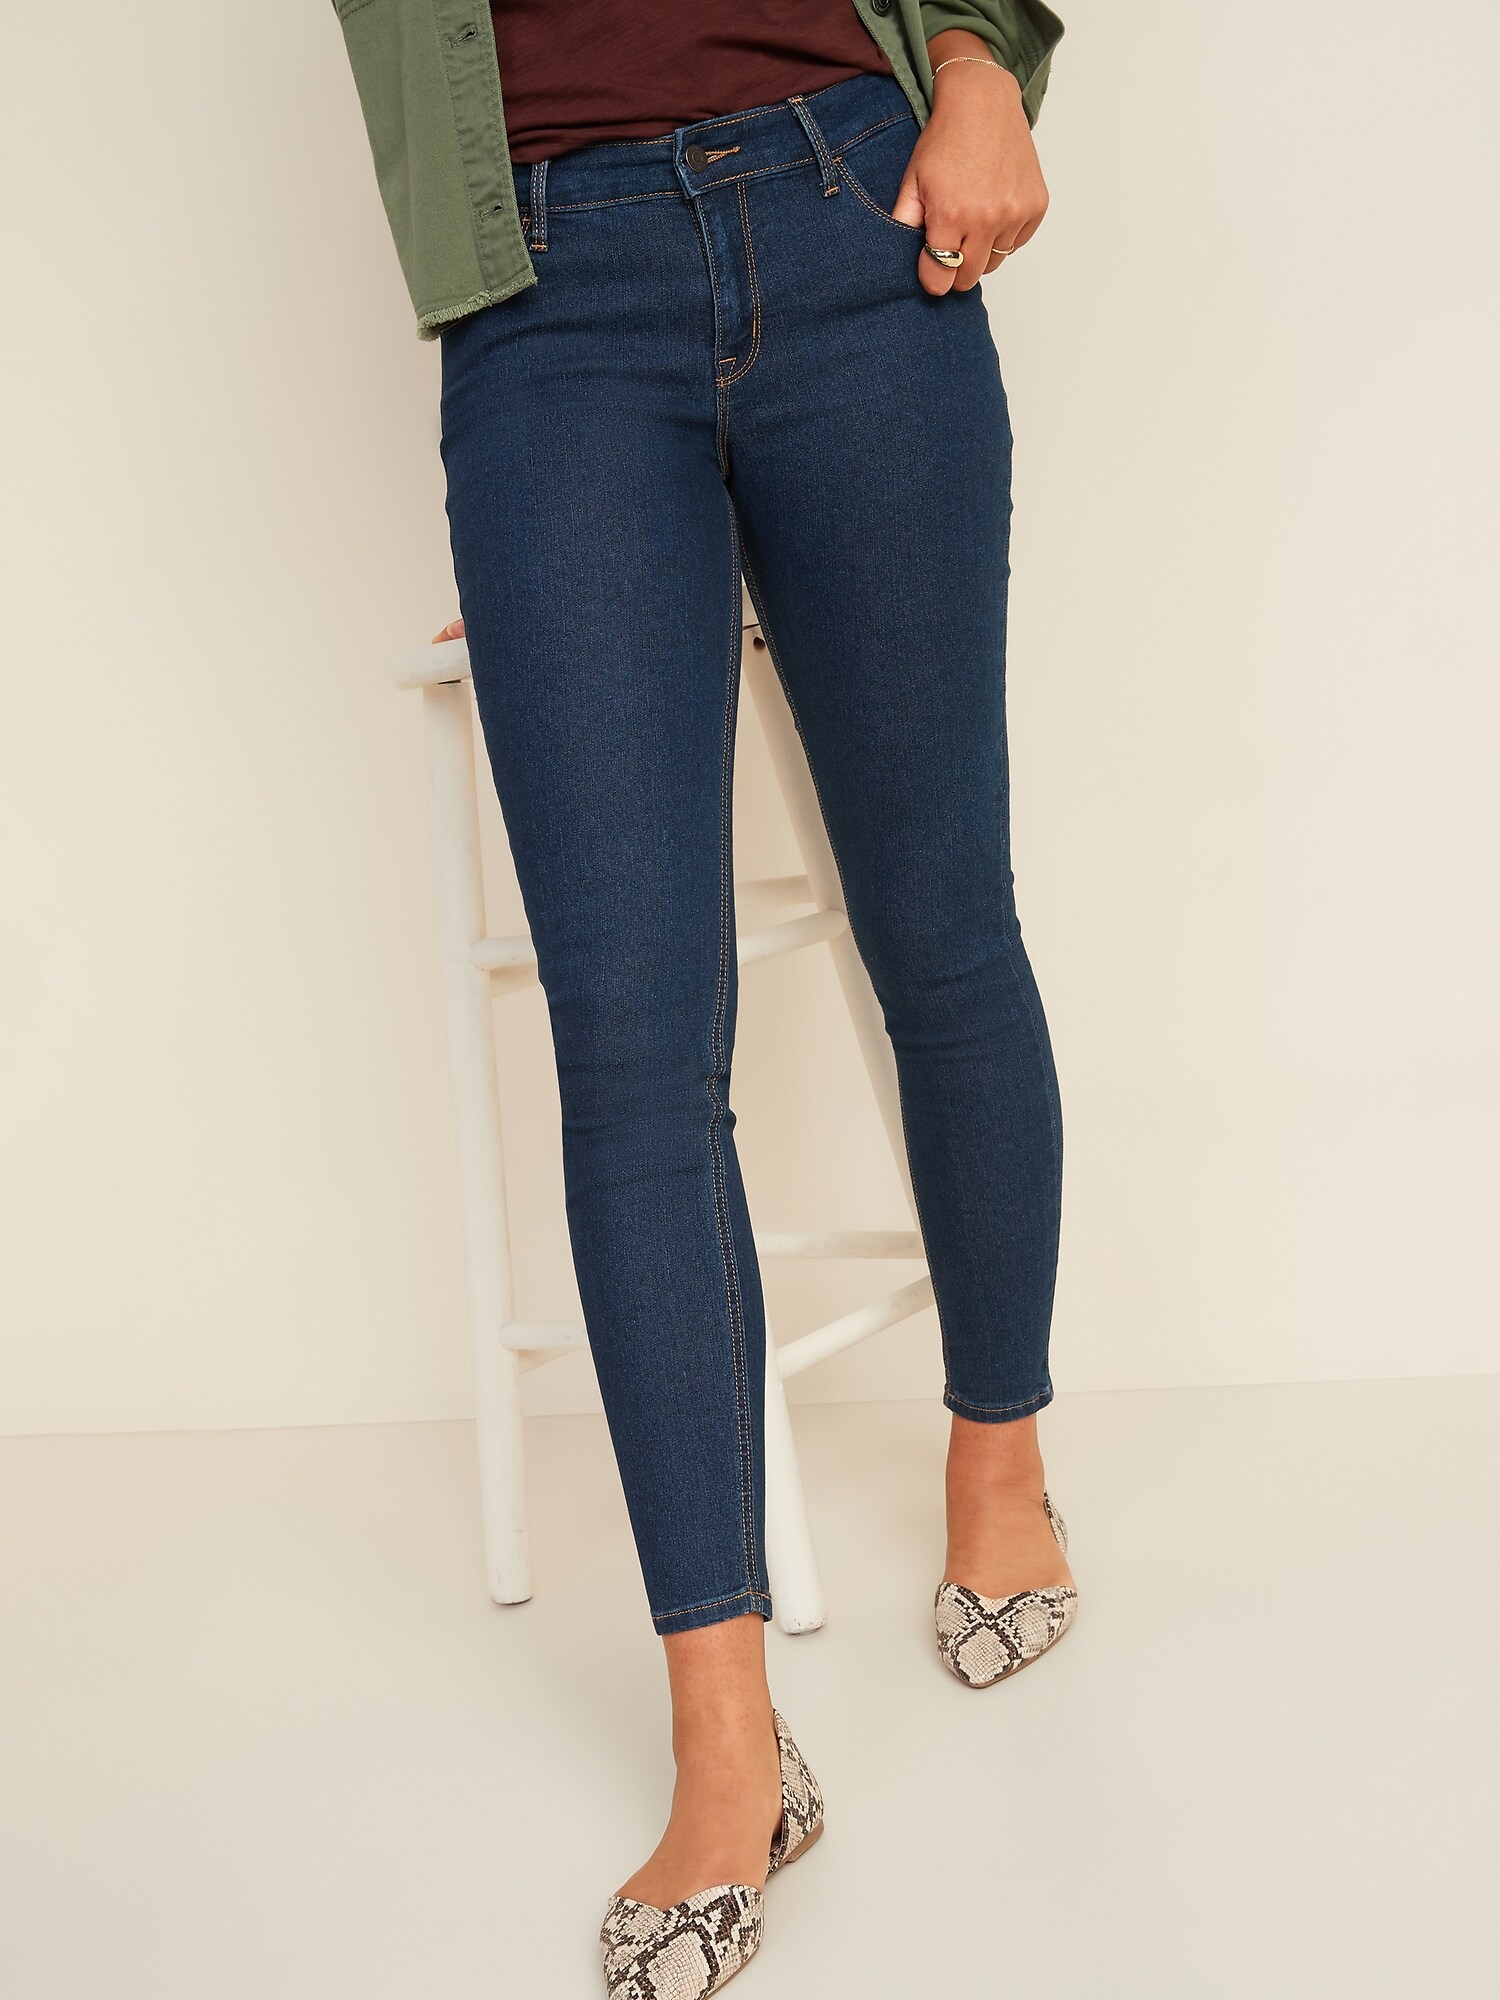 old navy super stretch jeans